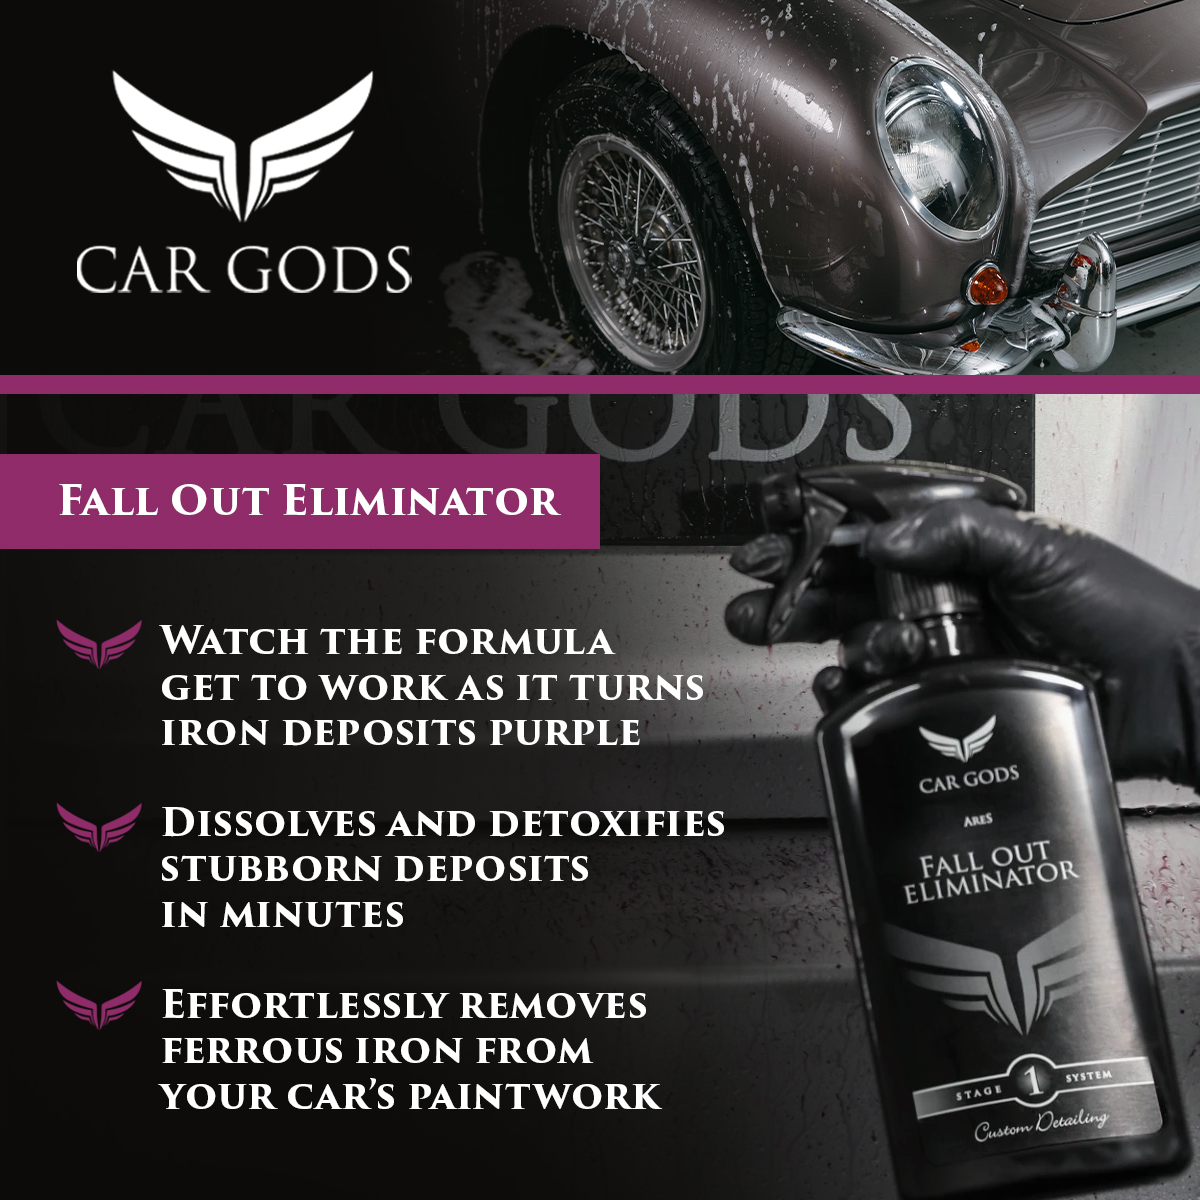 Car Gods Fall Out Eliminator. Dissolves and detoxifies stubborn iron deposits on your car’s paintwork, the colour active formula turns iron fallout purple as it dissolves. The ideal preparation for contact washing your car.